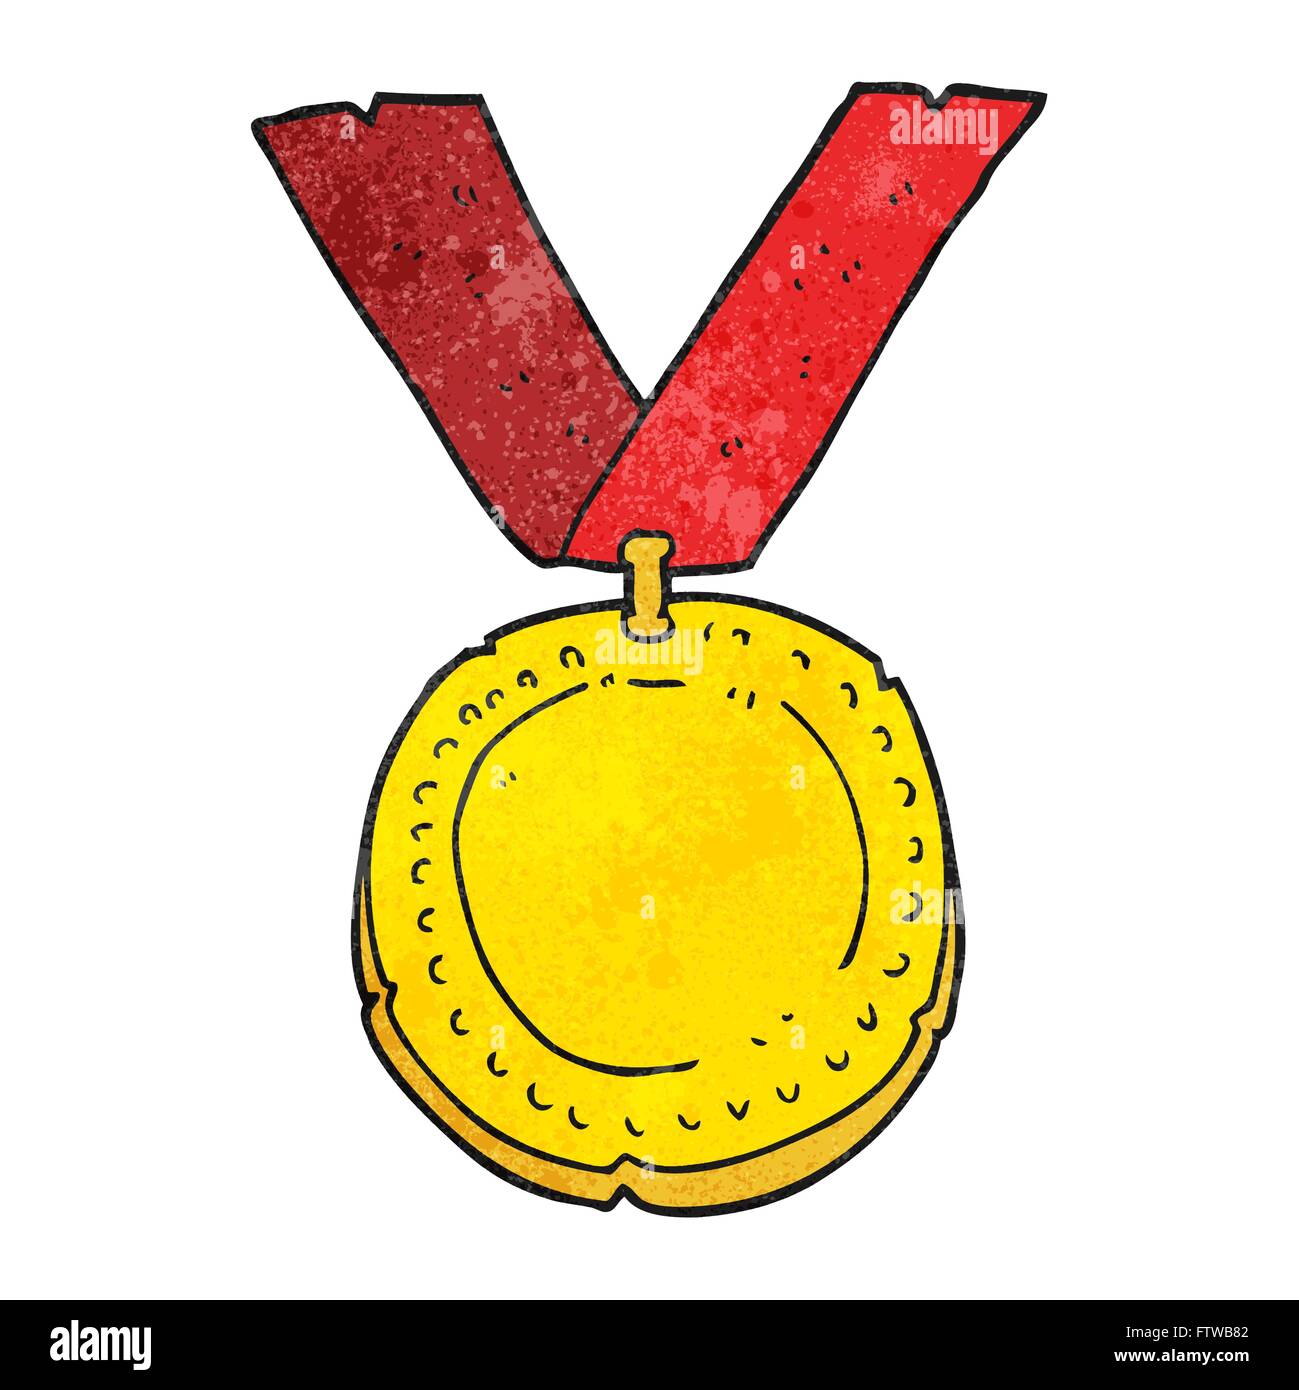 freehand textured cartoon medal Stock Vector